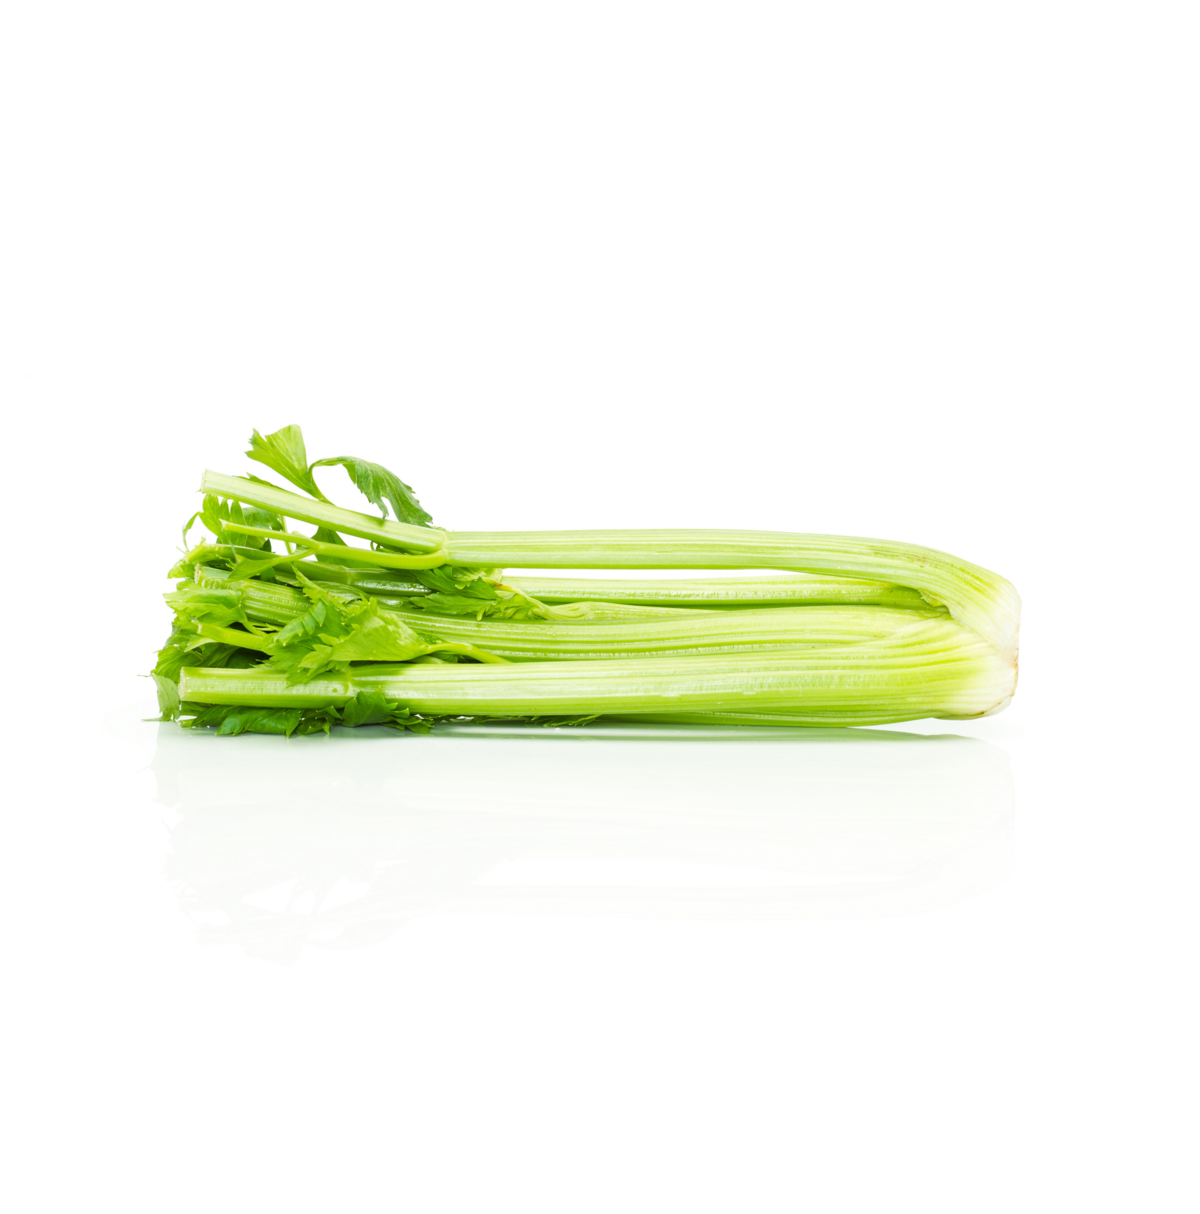 Celery cultivation for the best quality celery